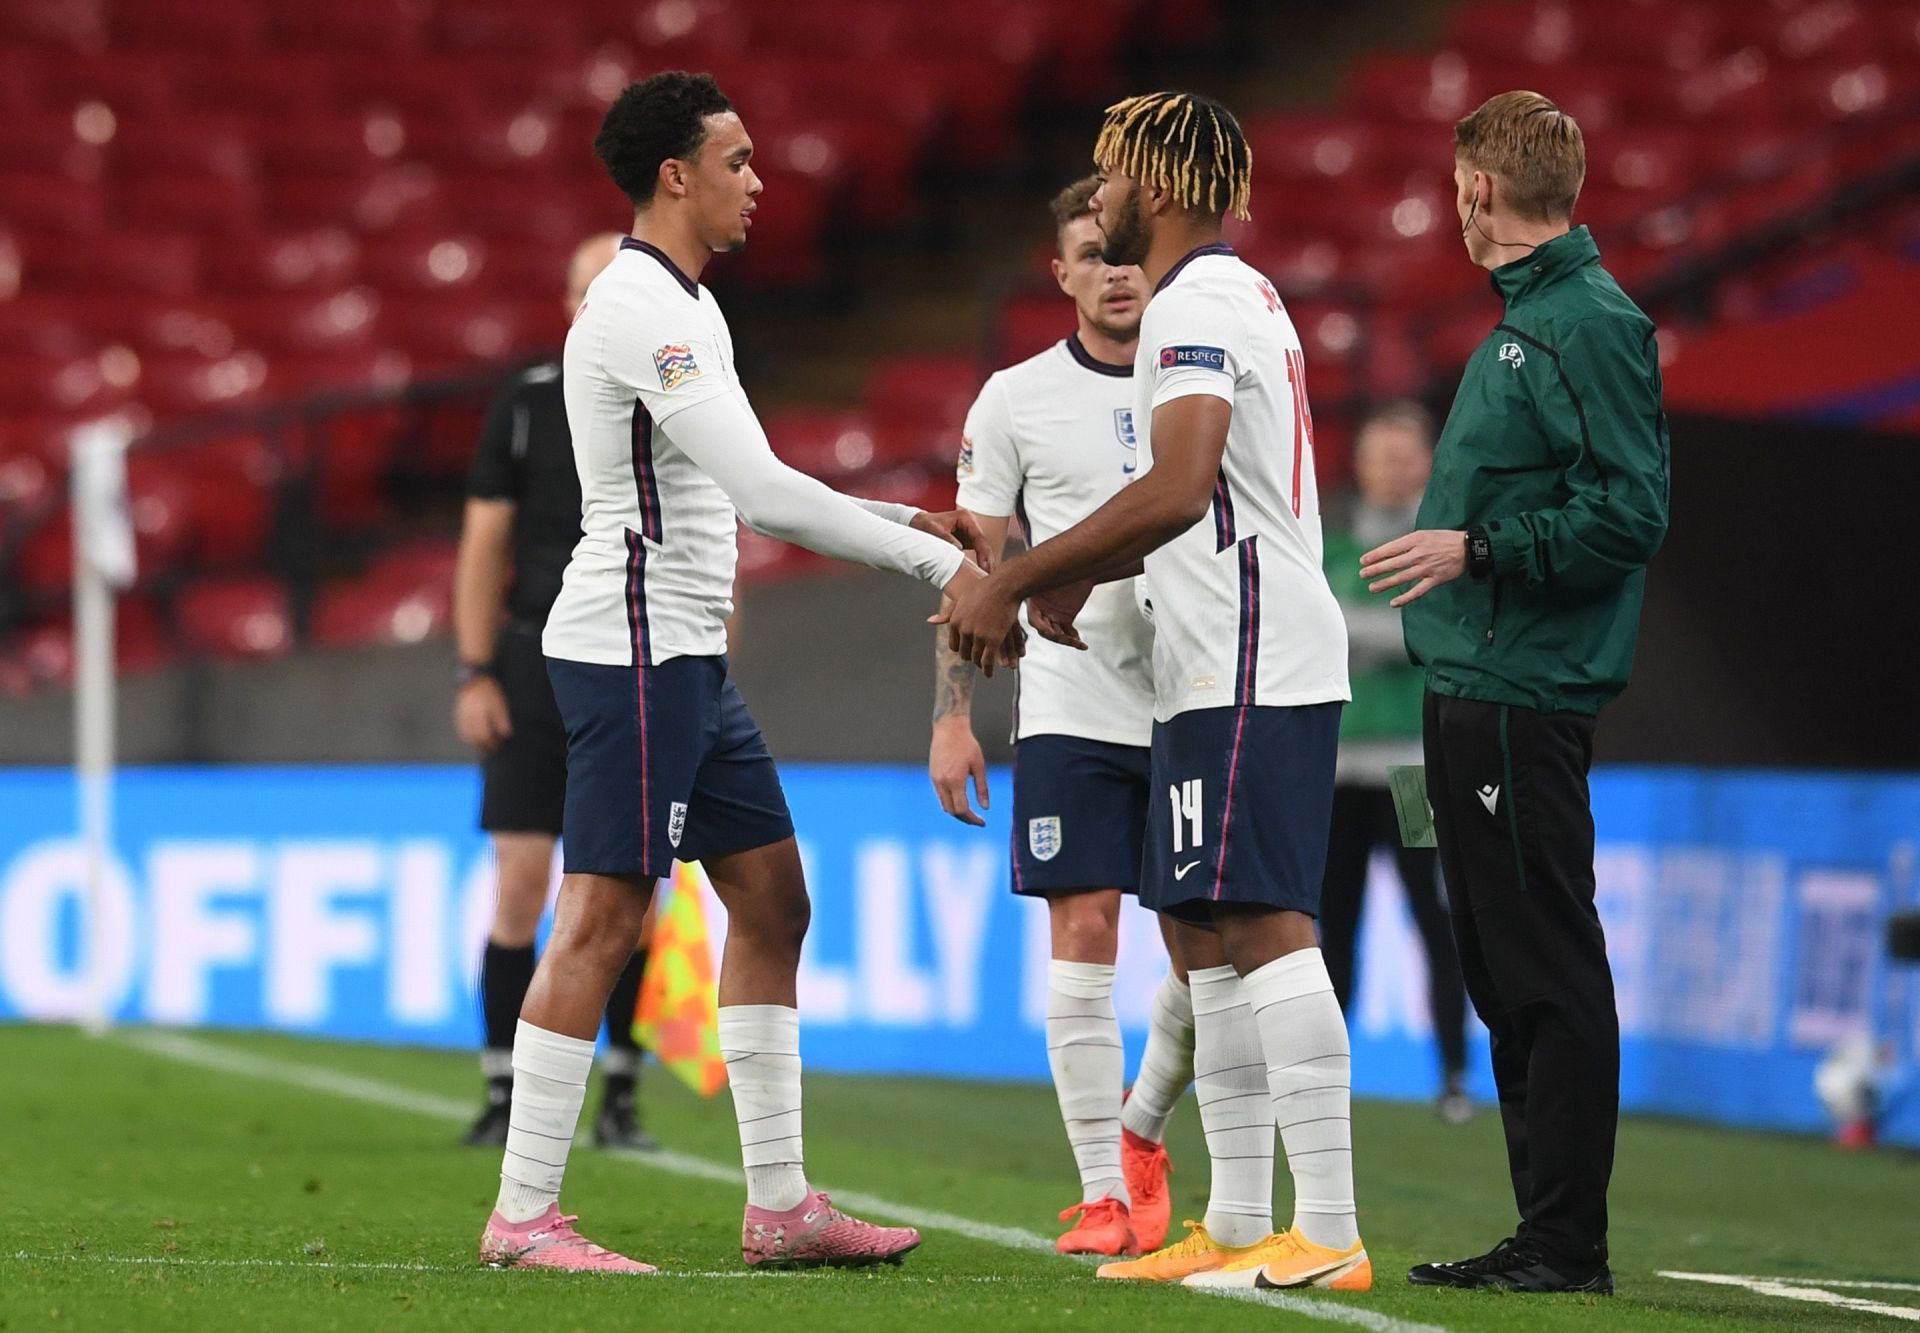 The two right-backs will battle for a starting spot under Southgate